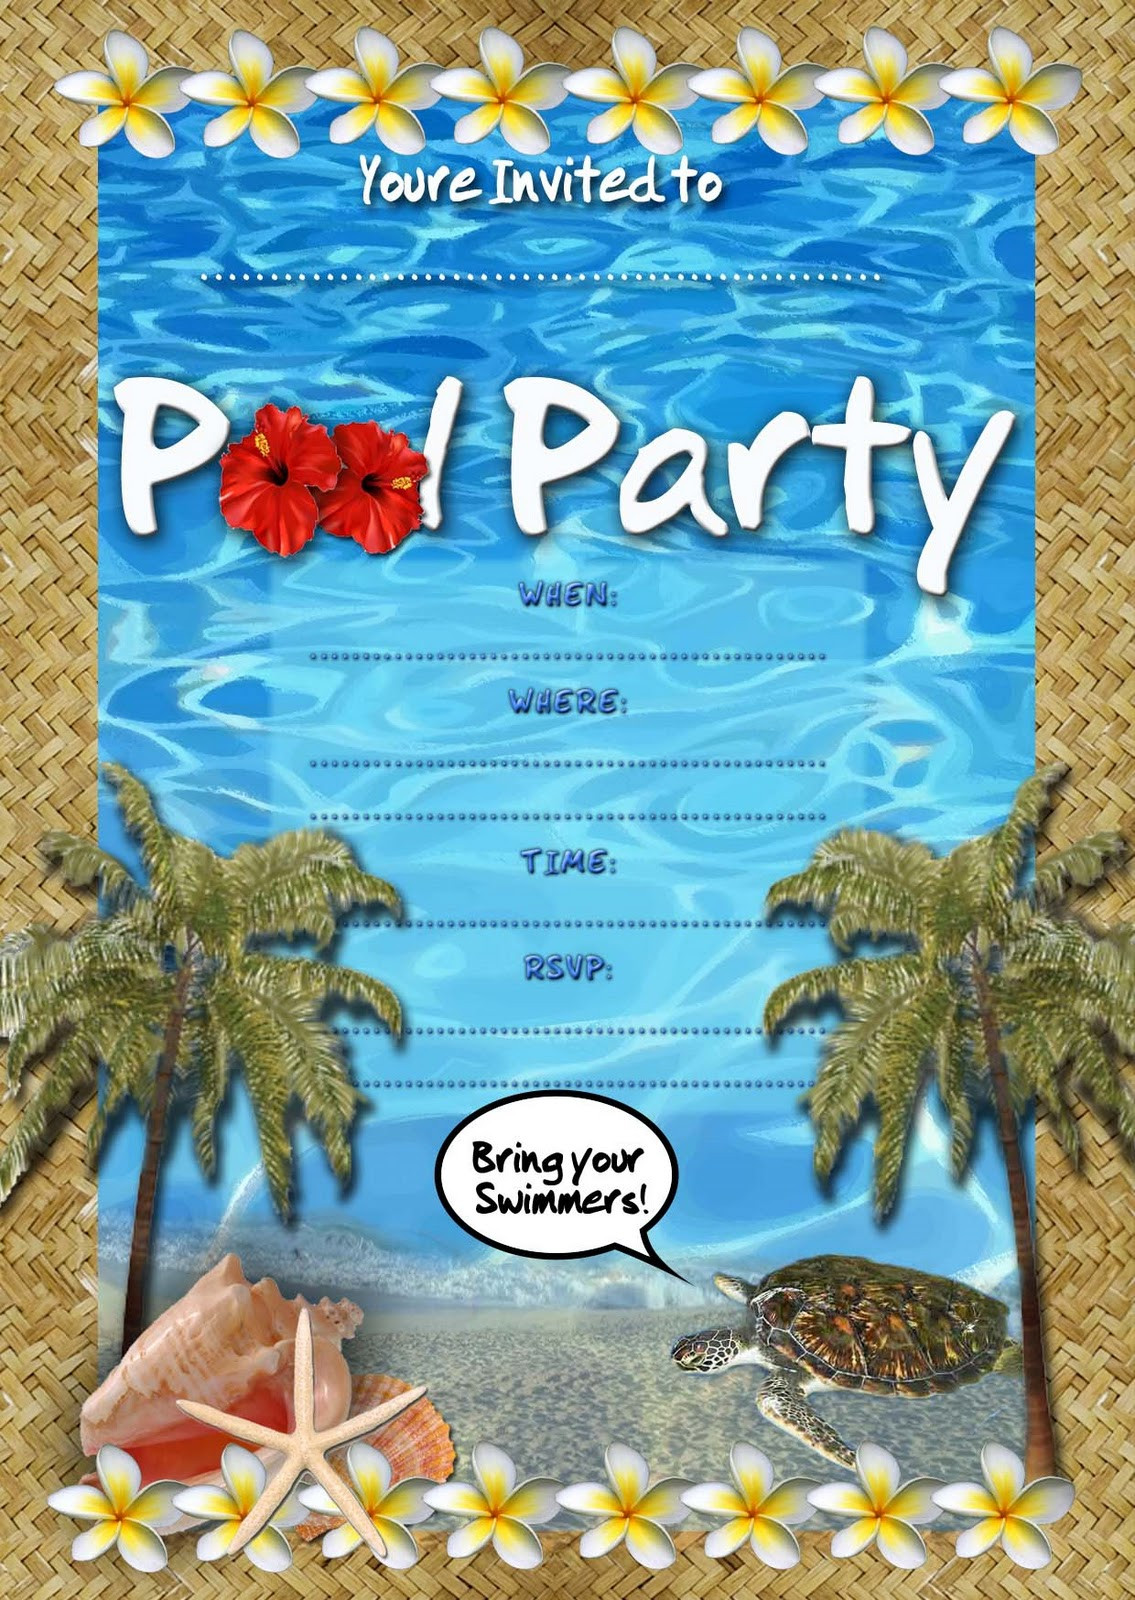 Pool Party Invitations Ideas
 FREE Kids Party Invitations Pool Party Invitation